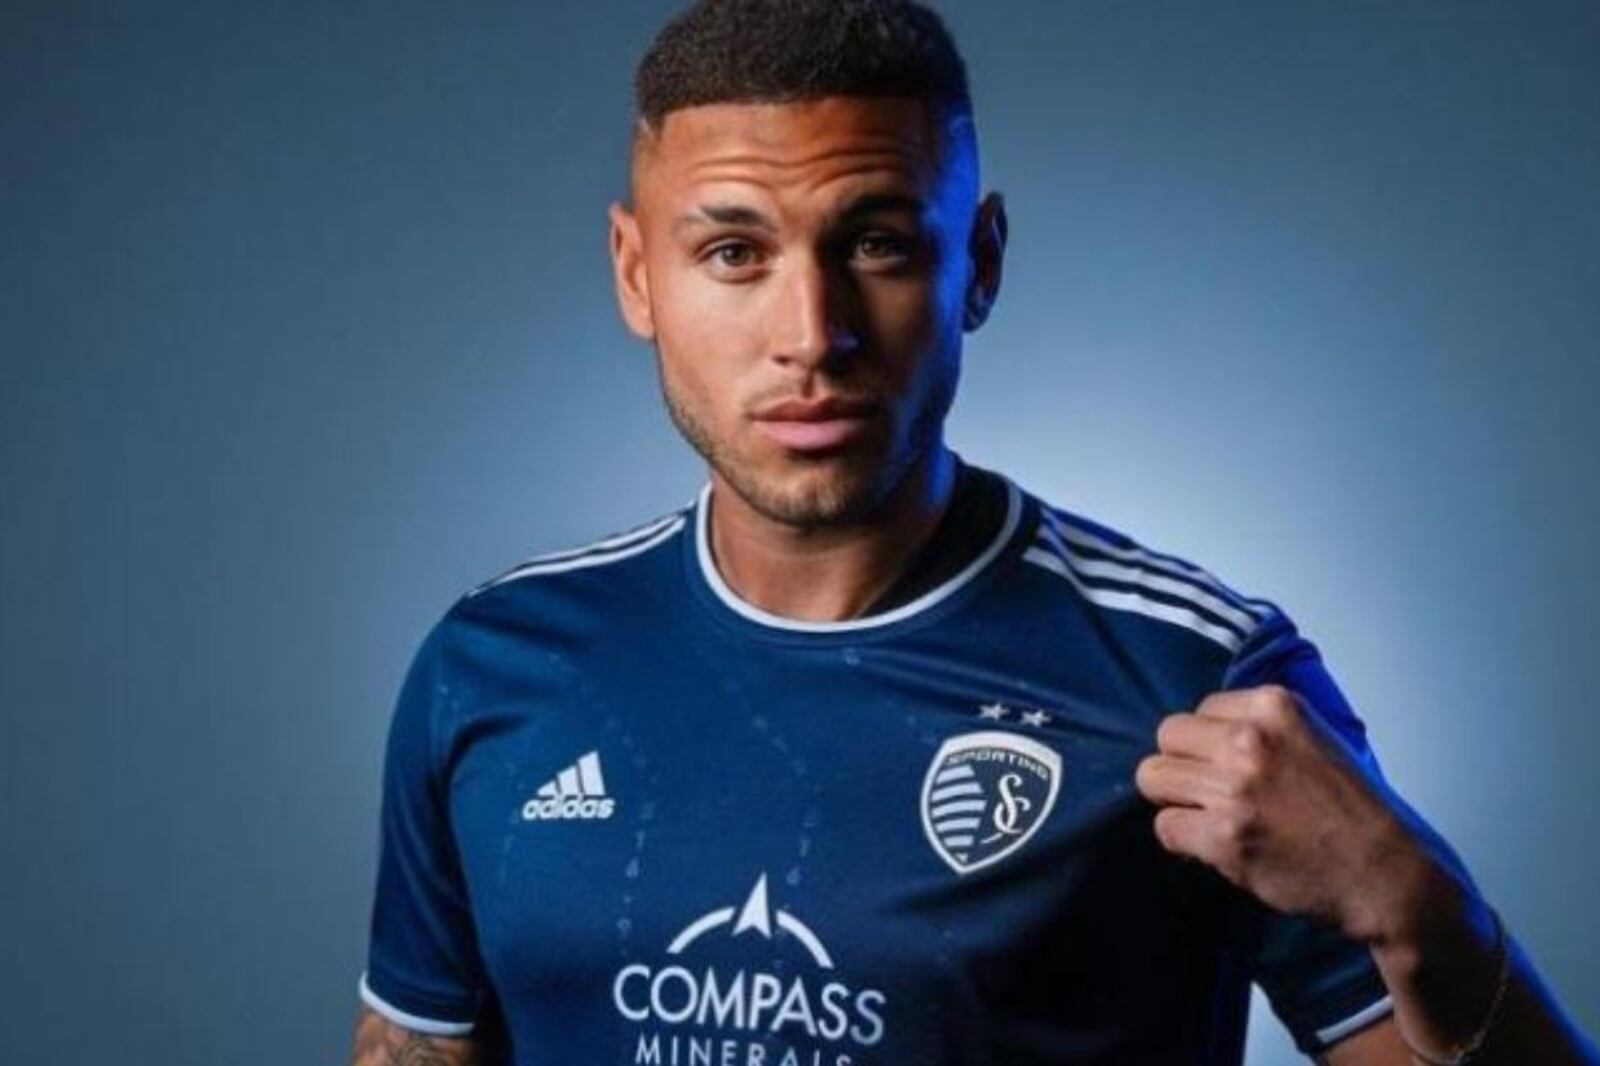 This player did doping and the MLS gave him a heavy sanction